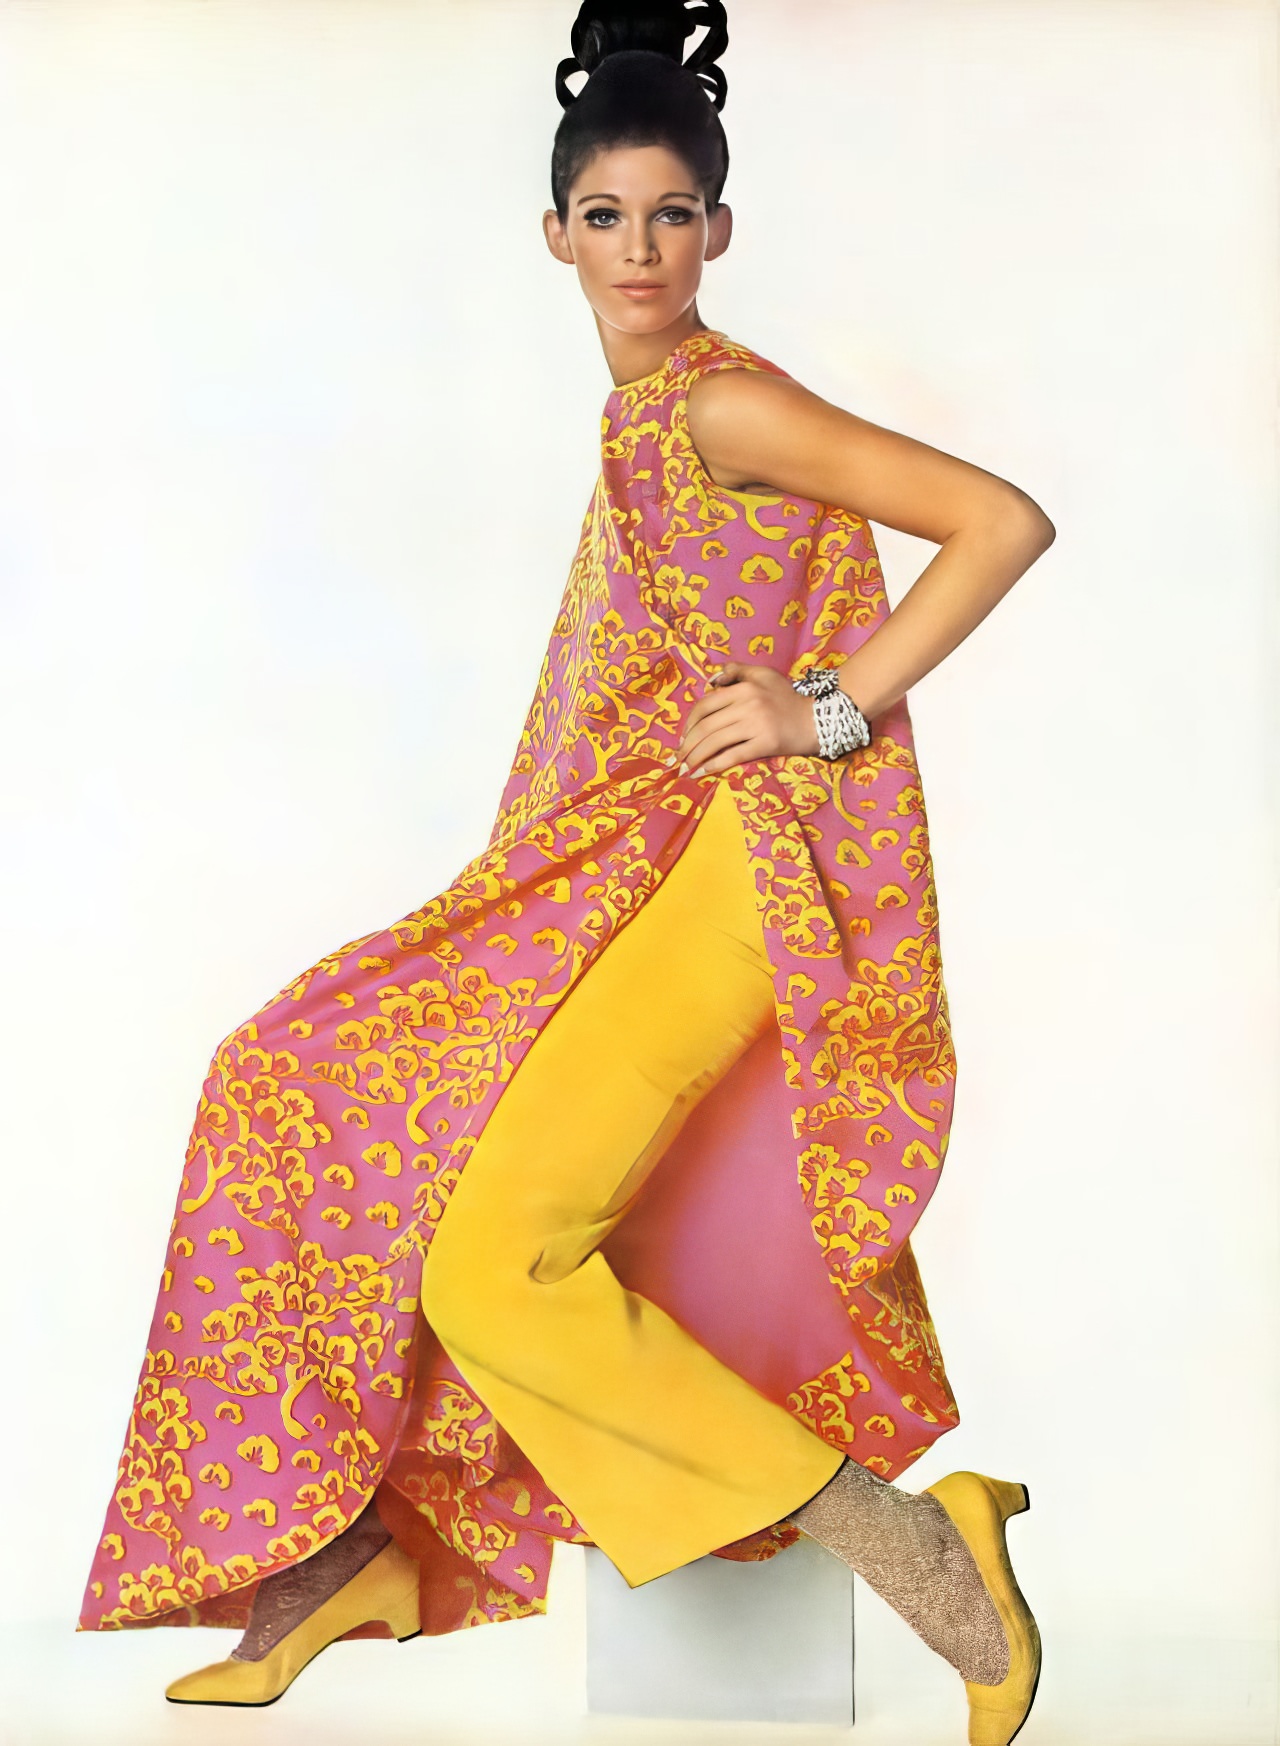 Ann Turkel in a yellow crêpe jumpsuit by Givenchy, 1967.